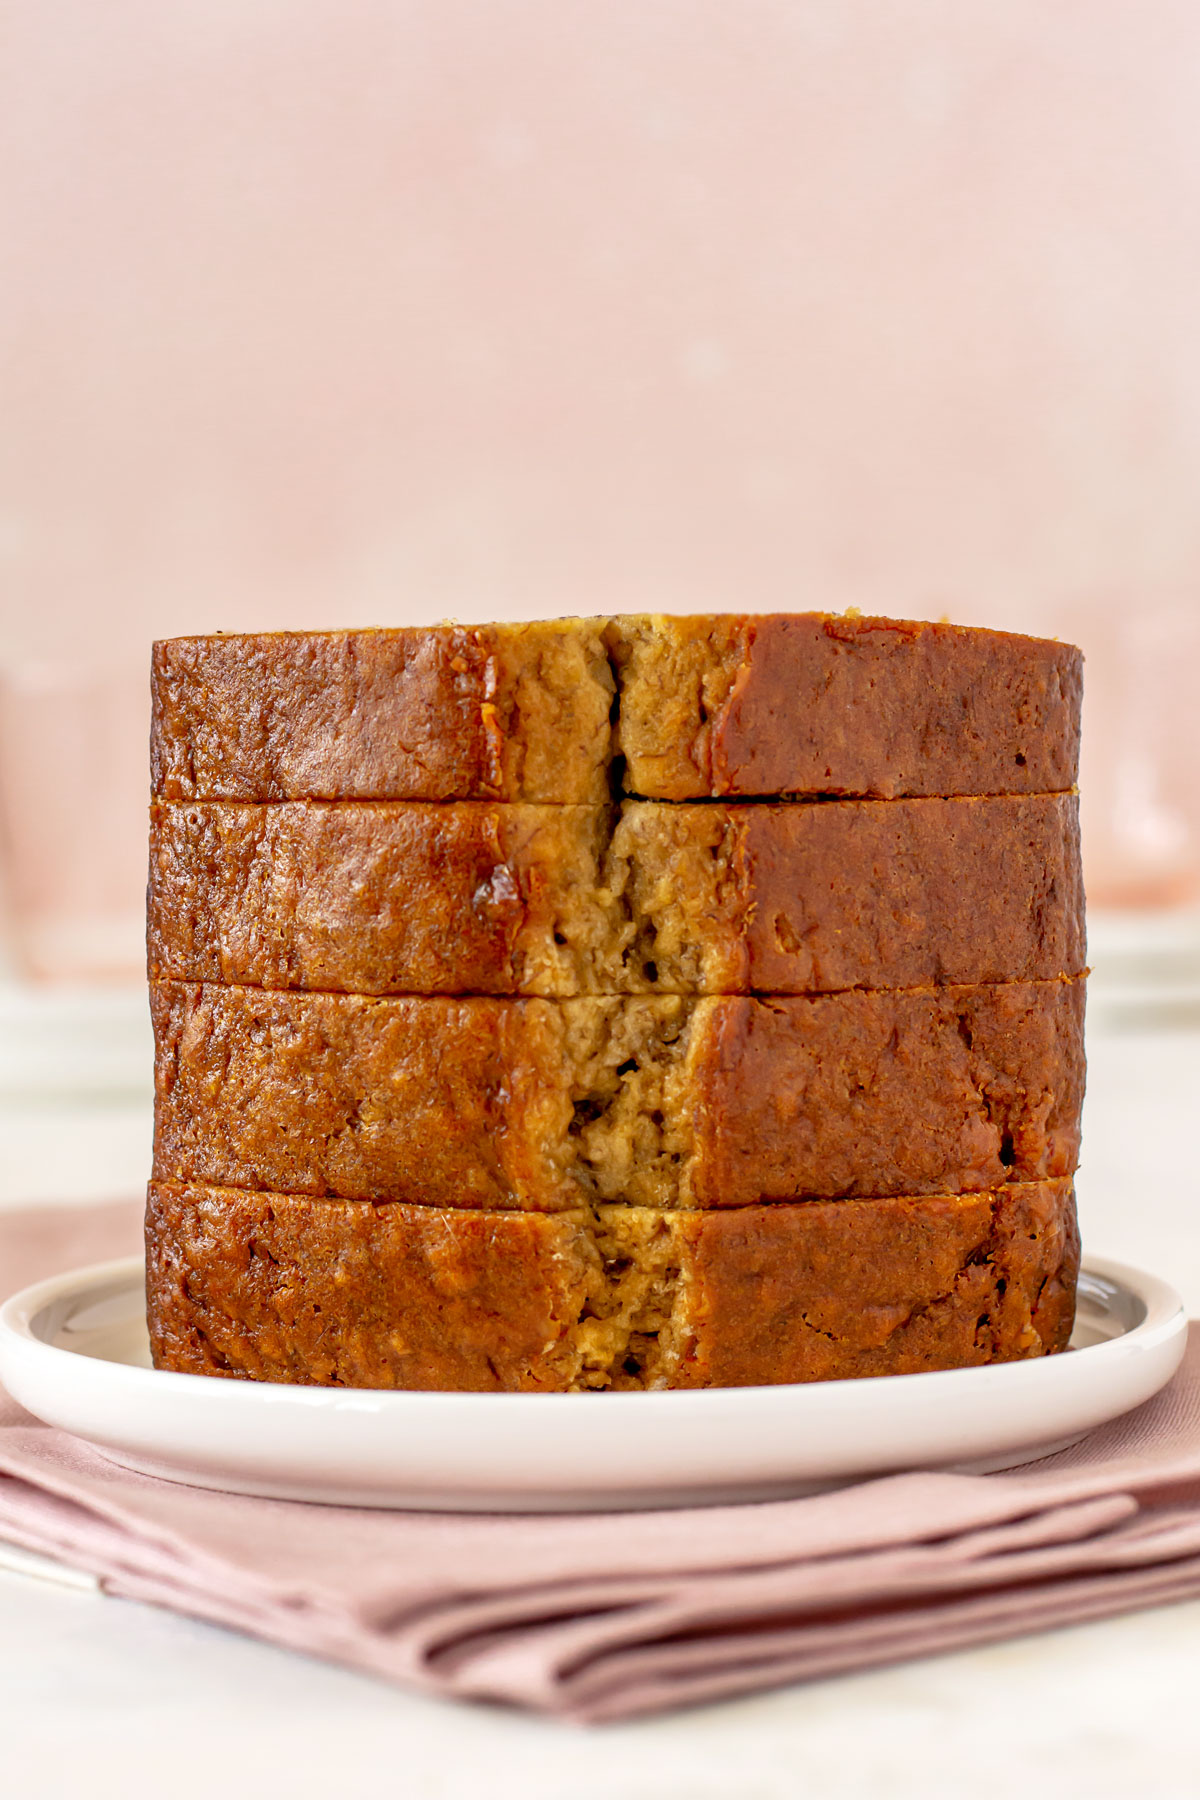 Stack of four thick slices of banana bread on a white plate. Plate is sitting on a pink napkin.